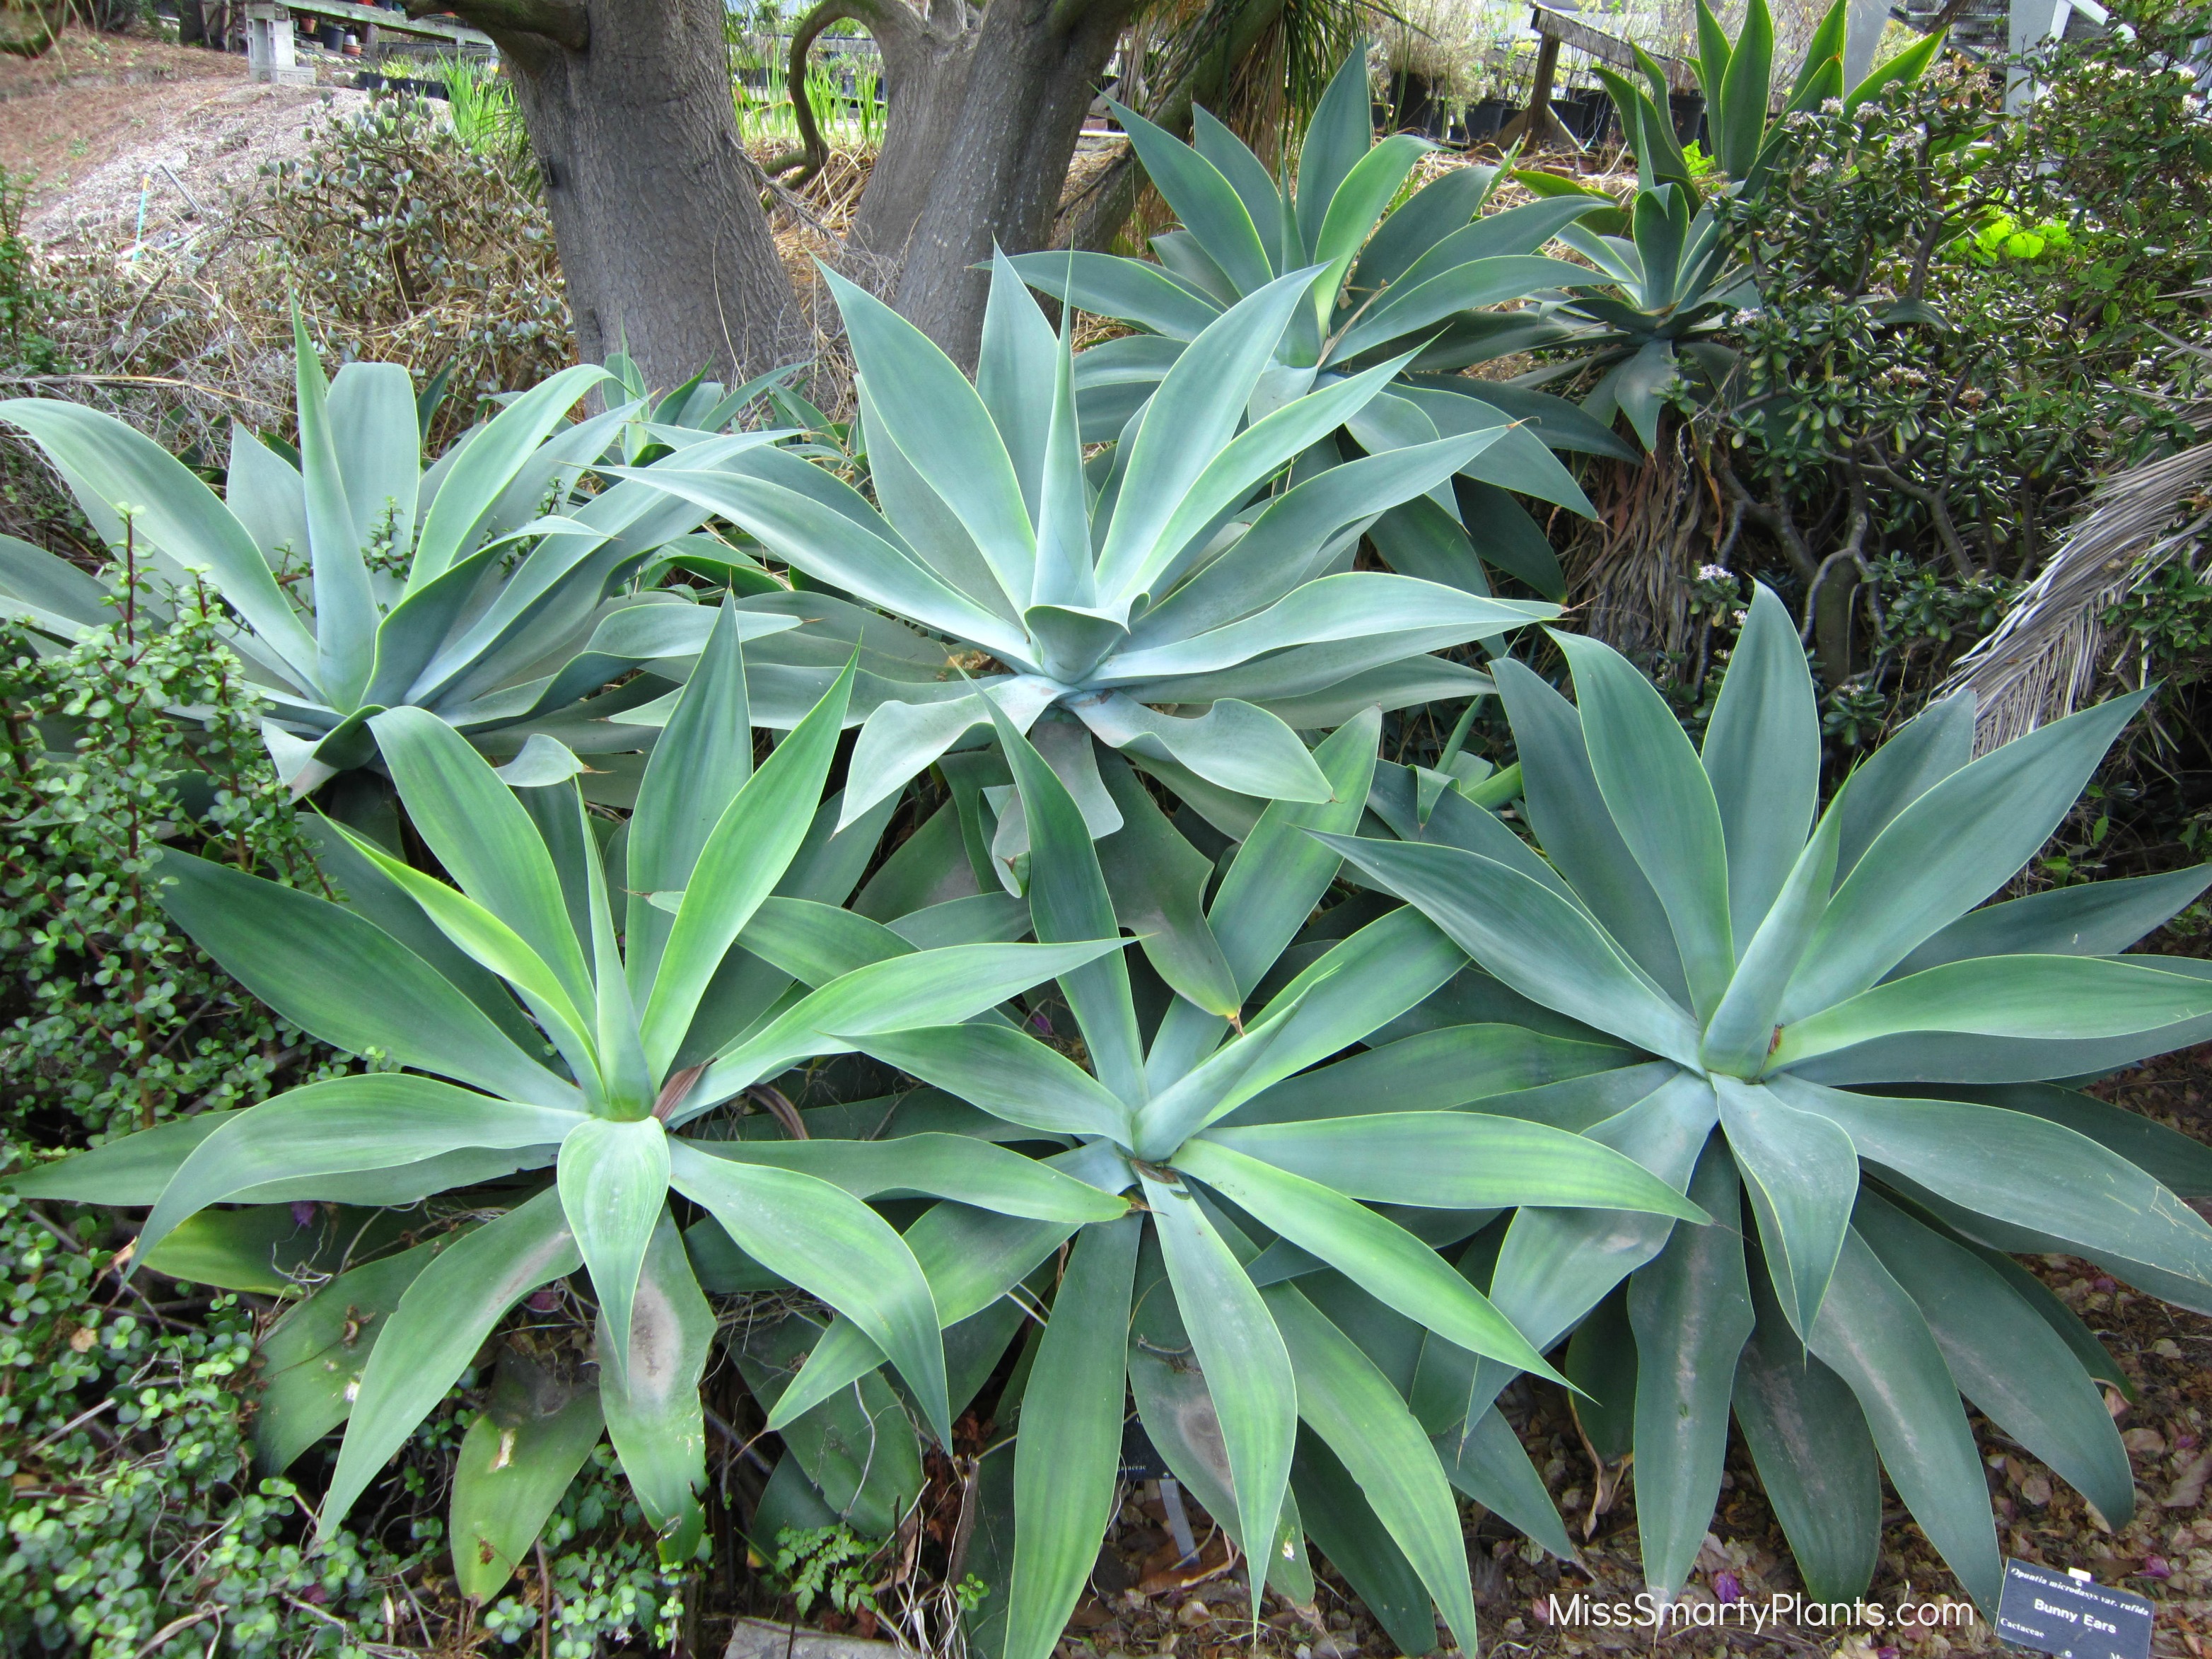 Agaves and Aloes at the South Coast Botanic Garden - Miss Smarty Plants